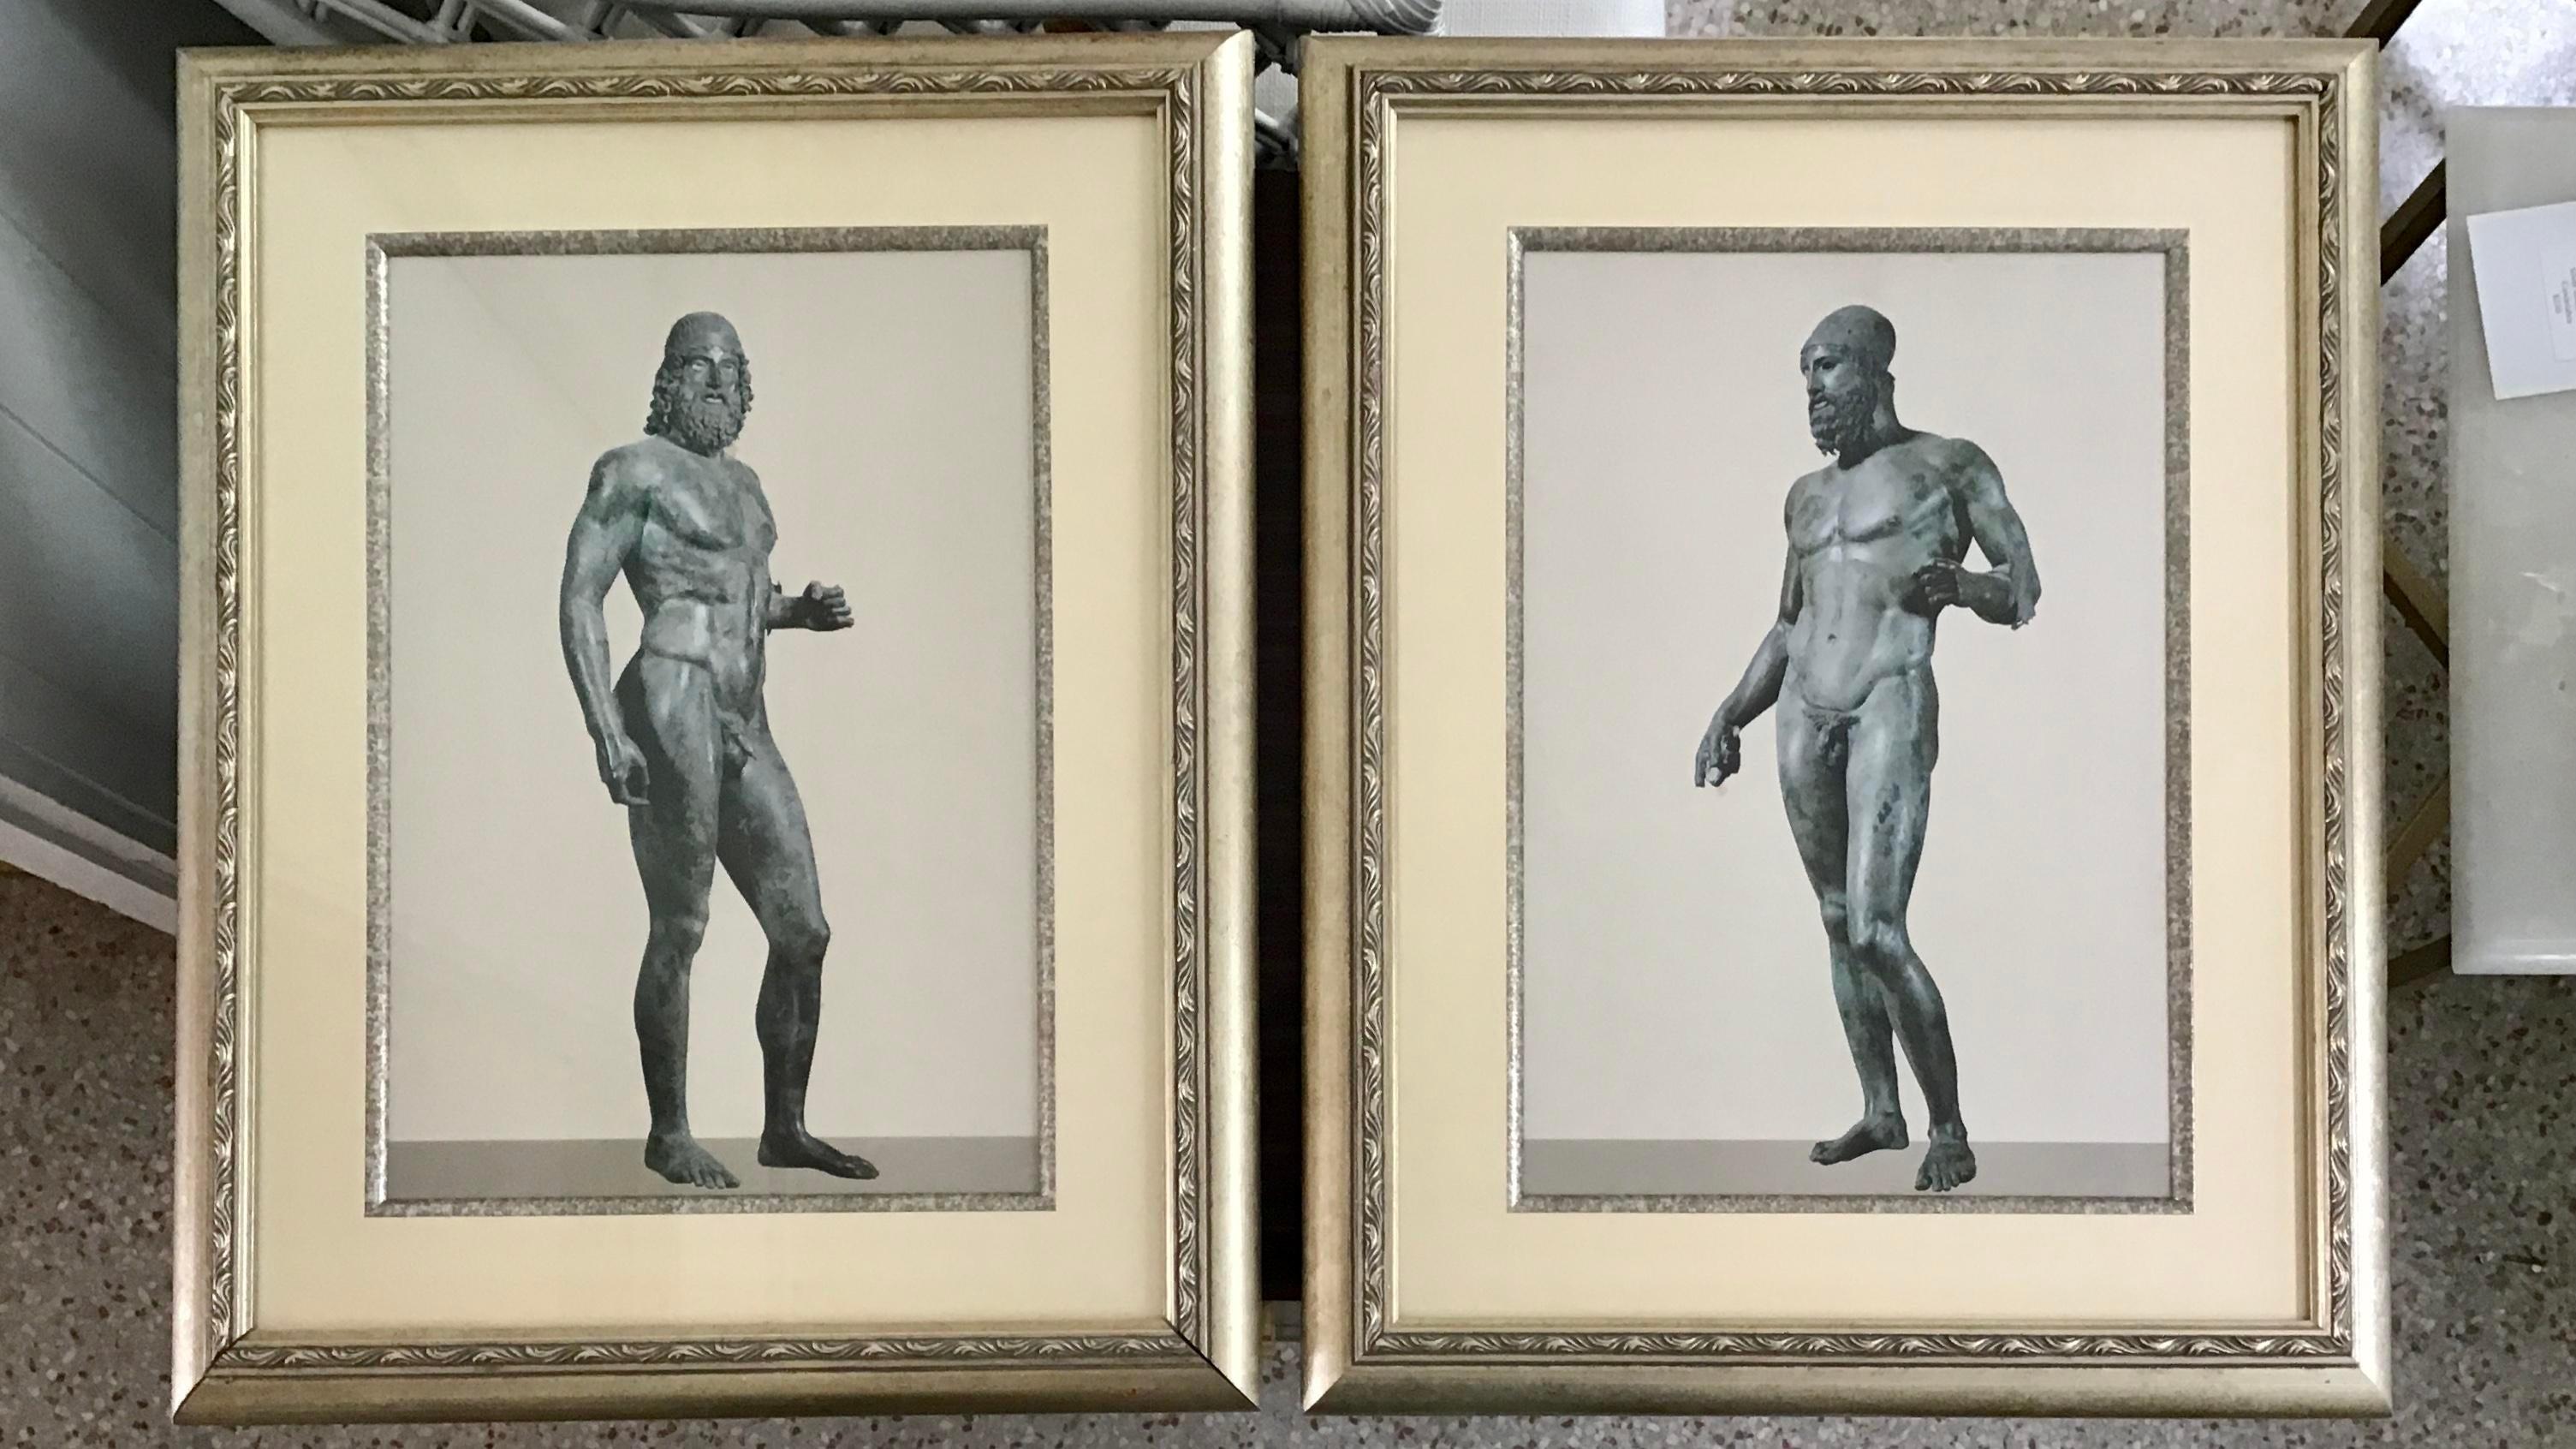 Pair of ancient Greek men statues photographs with frame and glass. Beautiful border details and colors.